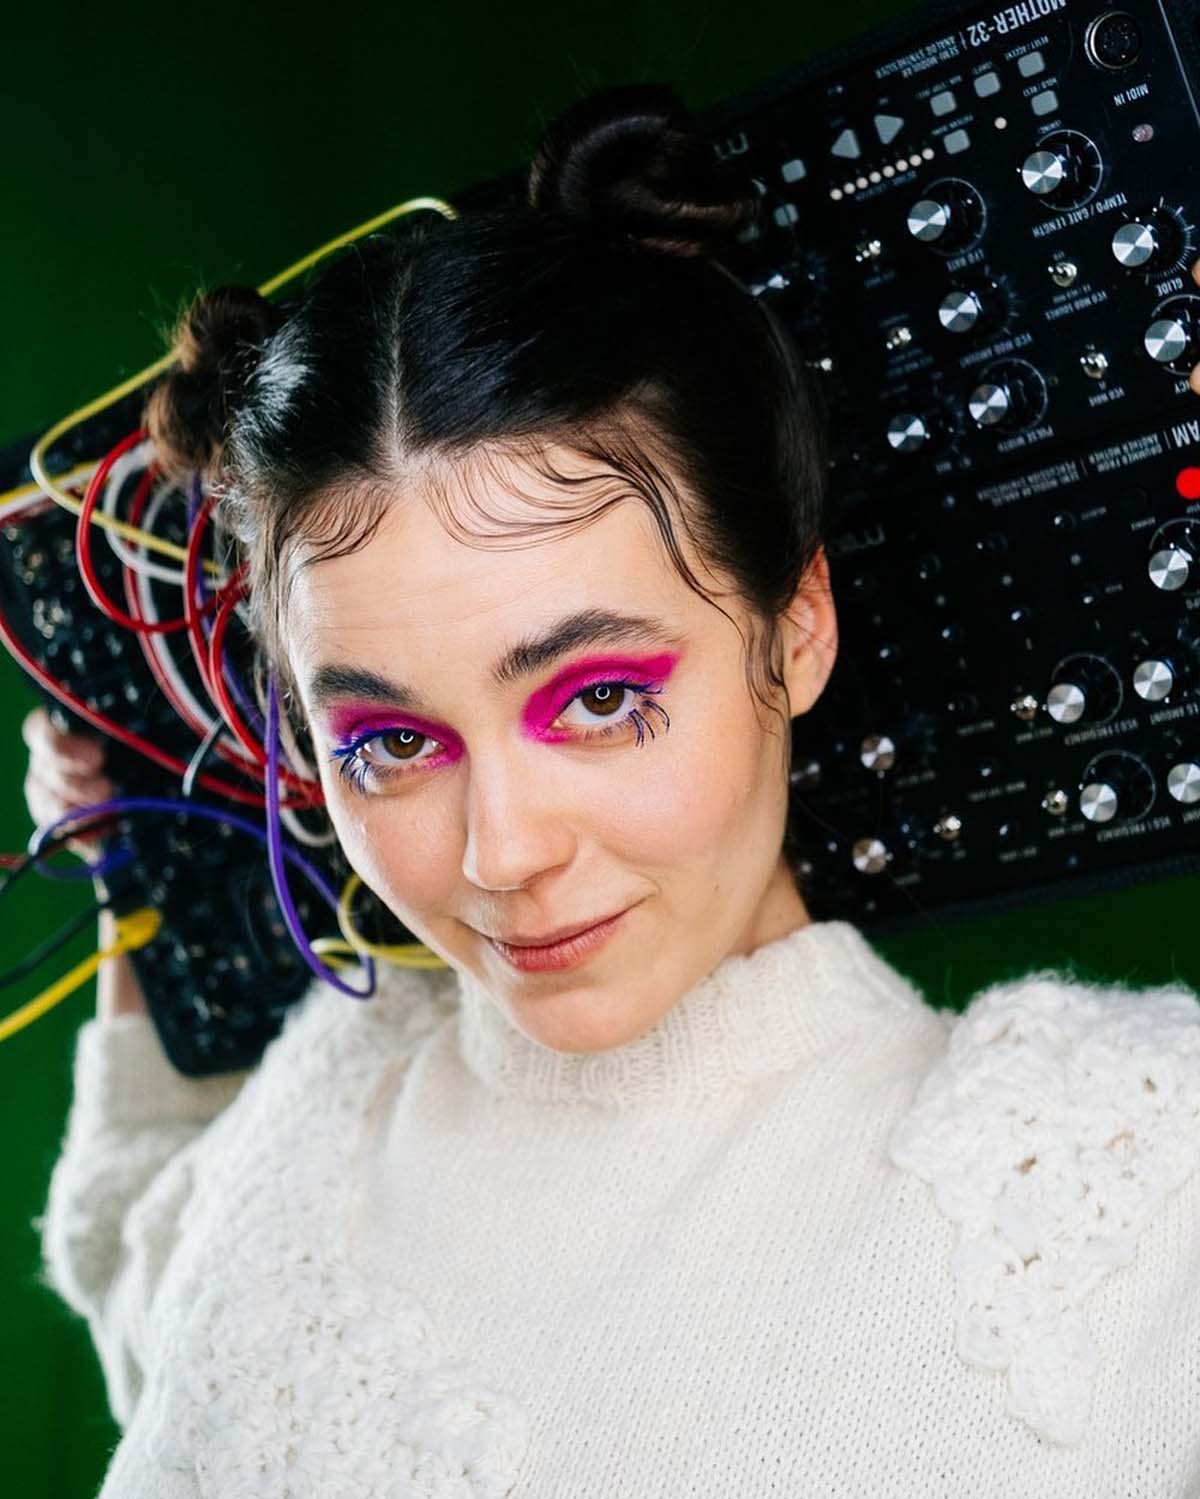 Close-up of a white woman with heavily pink-rimmed eyes, her dark hair parted in the centre and pinned up in double buns. Evija Vēbere smiles slightly into the camera. She is wearing a white woollen jumper and is holding a mixer with colourful cables plugged into it behind her head.